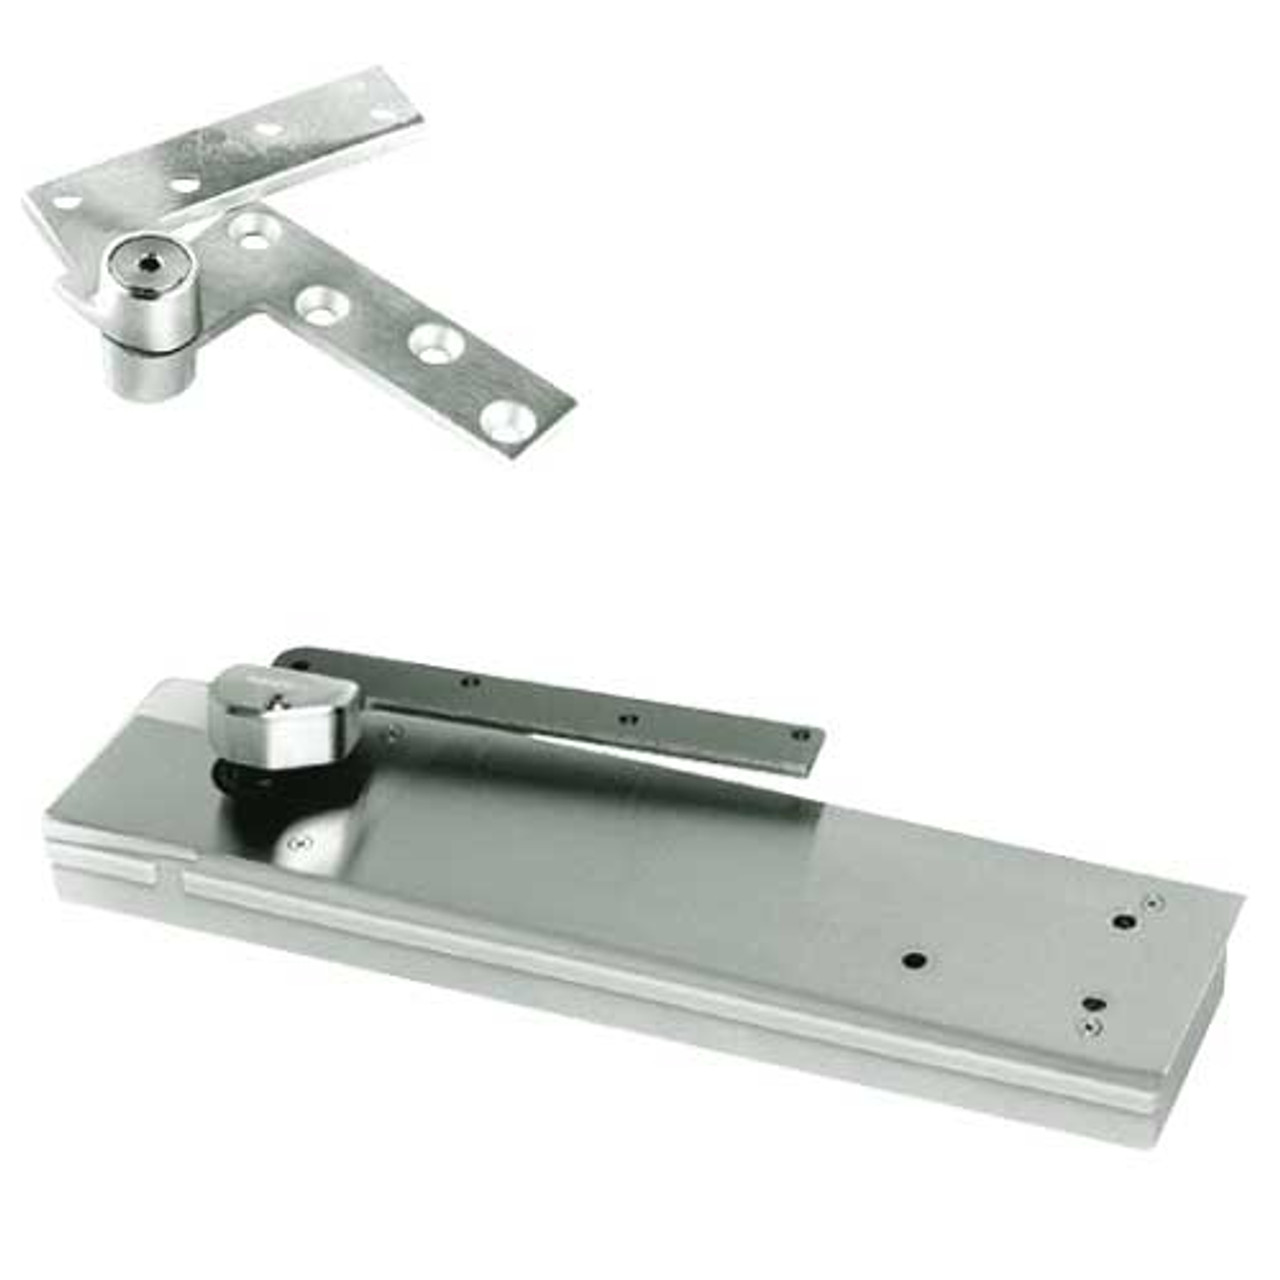 5103ABC105-1-1/2OS-LFP-LTP-LH-618 Rixson 51 Series 1-1/2" Offset Hung Shallow Depth Floor Closers in Bright Nickel Finish